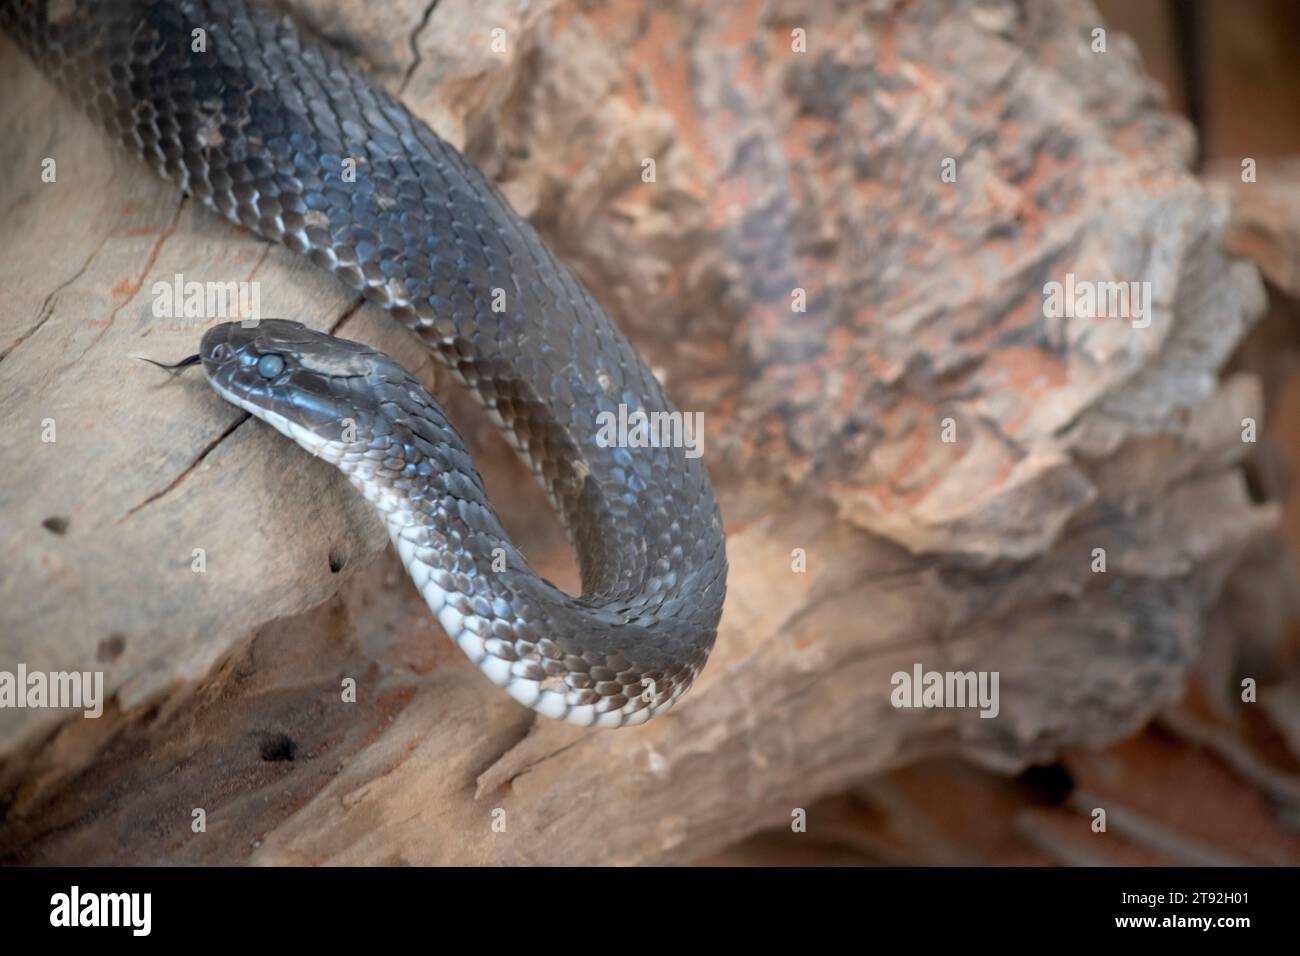 the tiger snake is slithering on a log, it has its tongue out Stock Photo